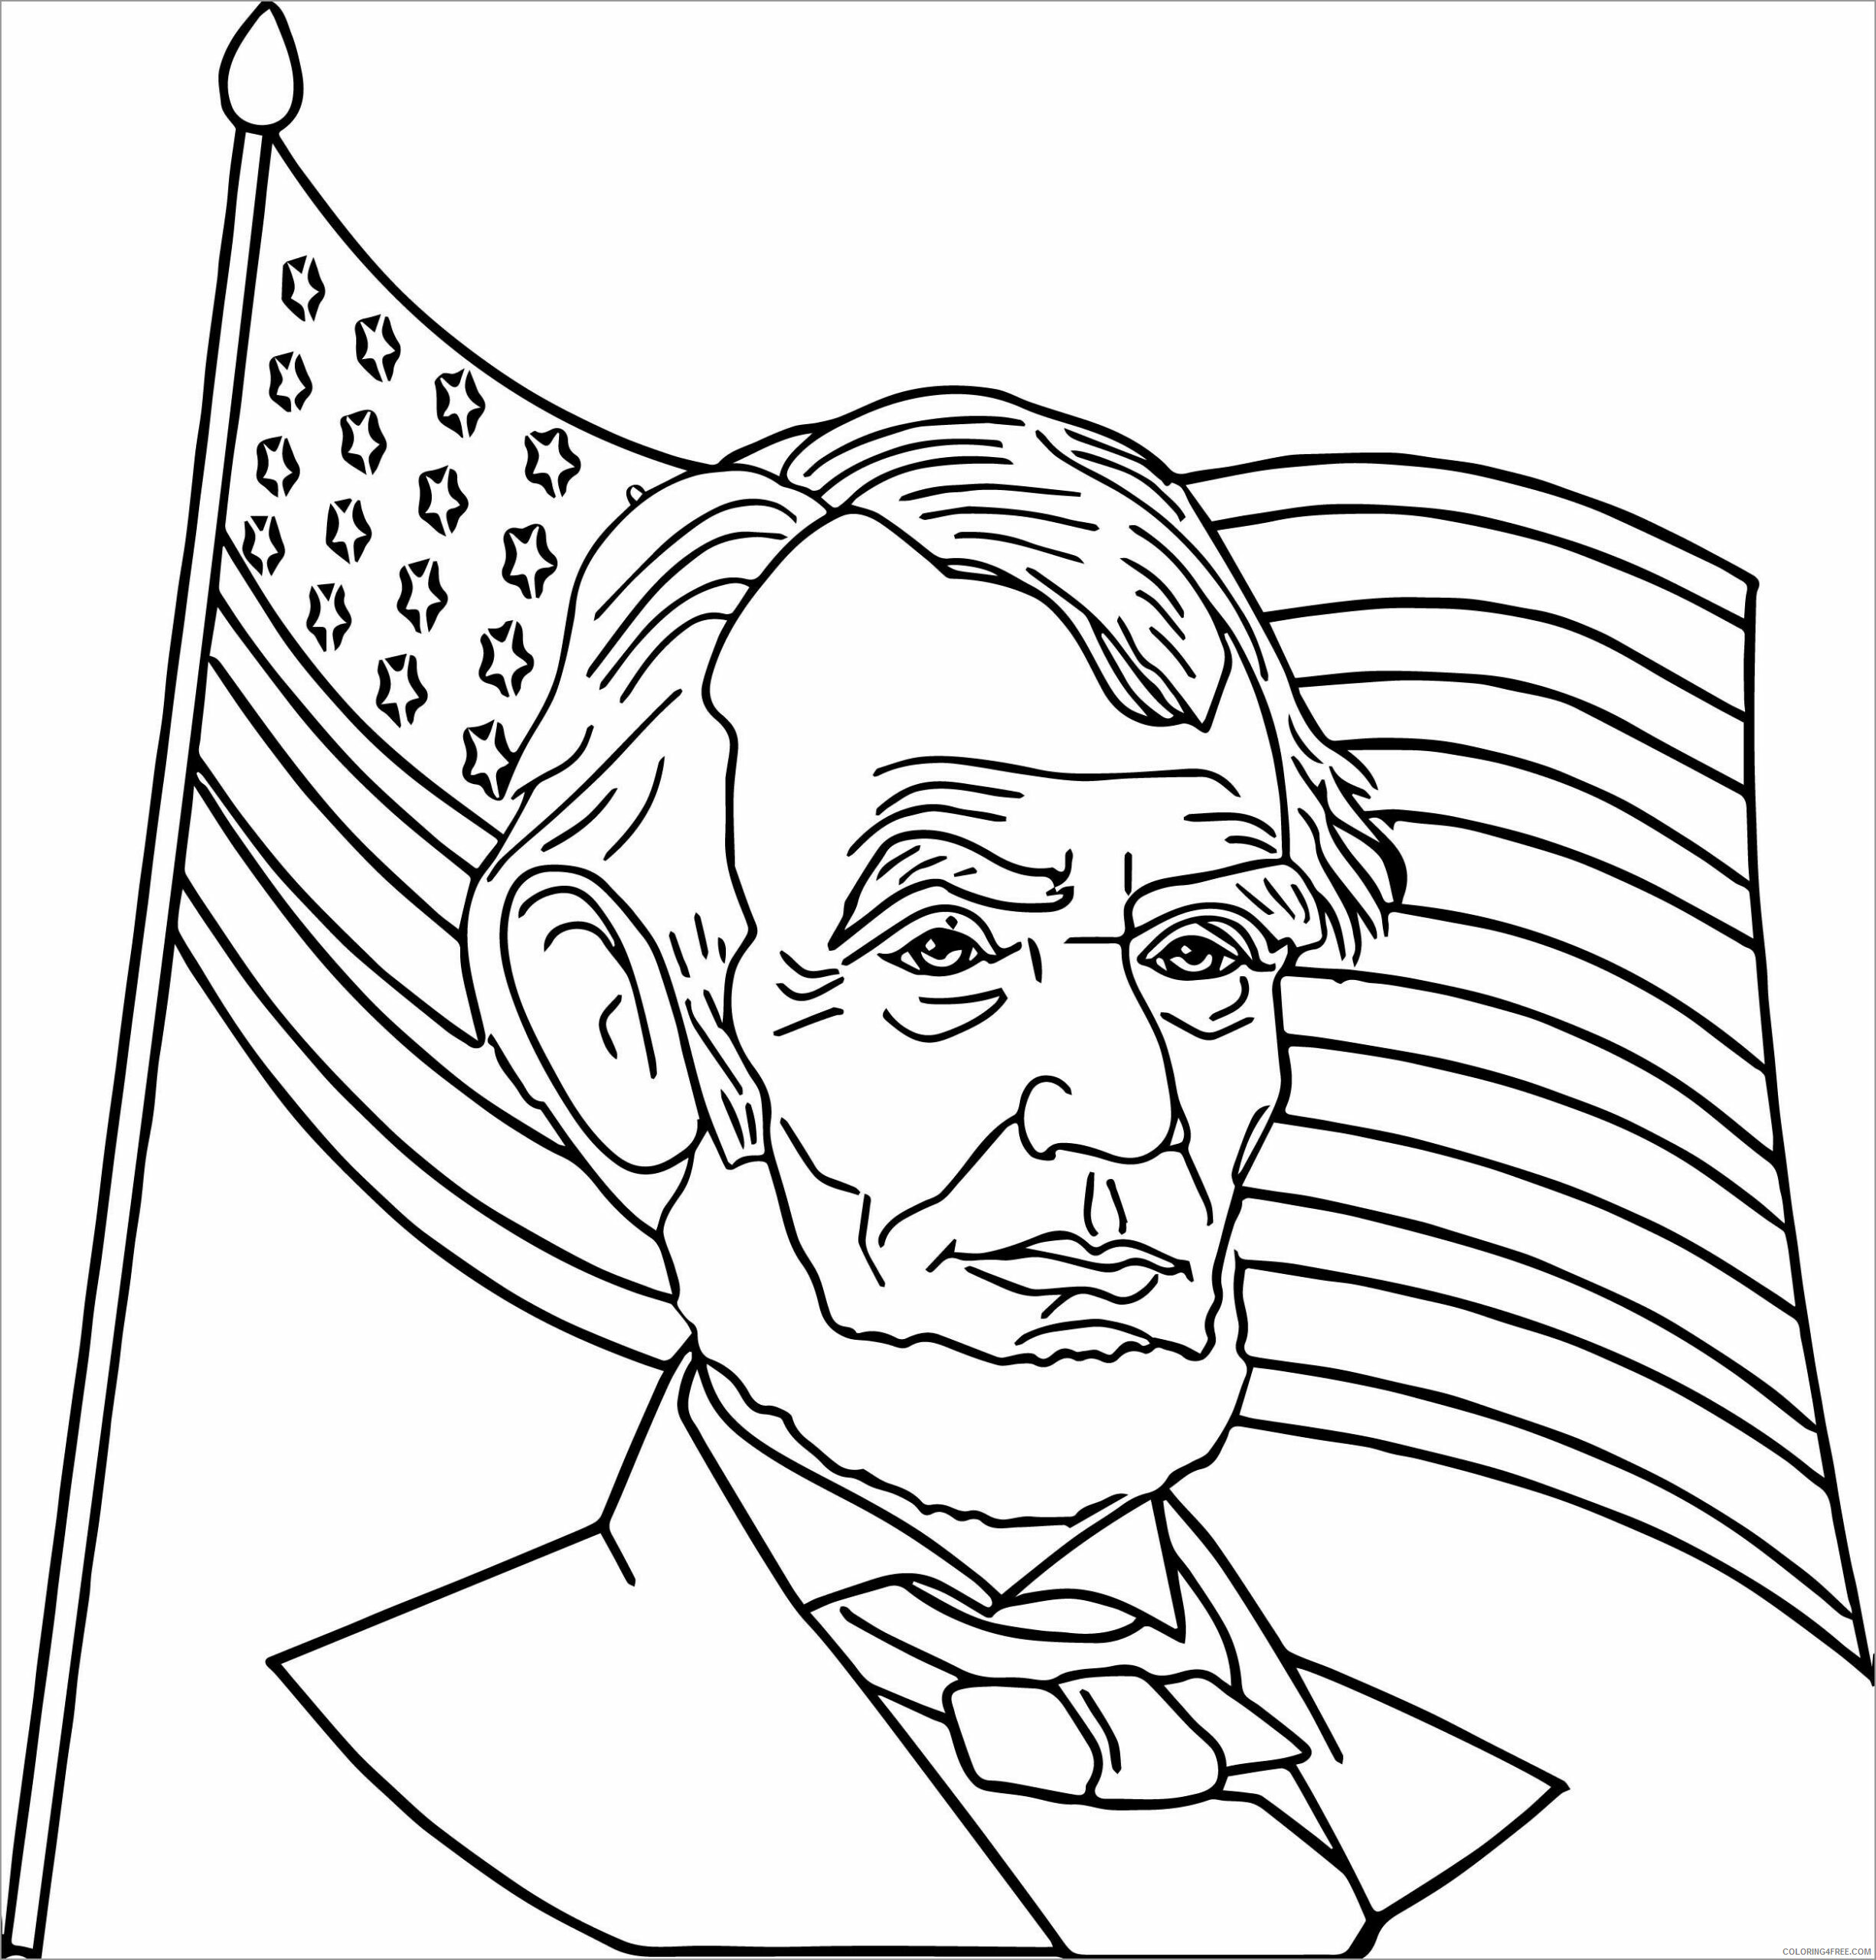 Abraham Lincoln Coloring Pages Educational with usa flag kids Printable 2020 0524 Coloring4free